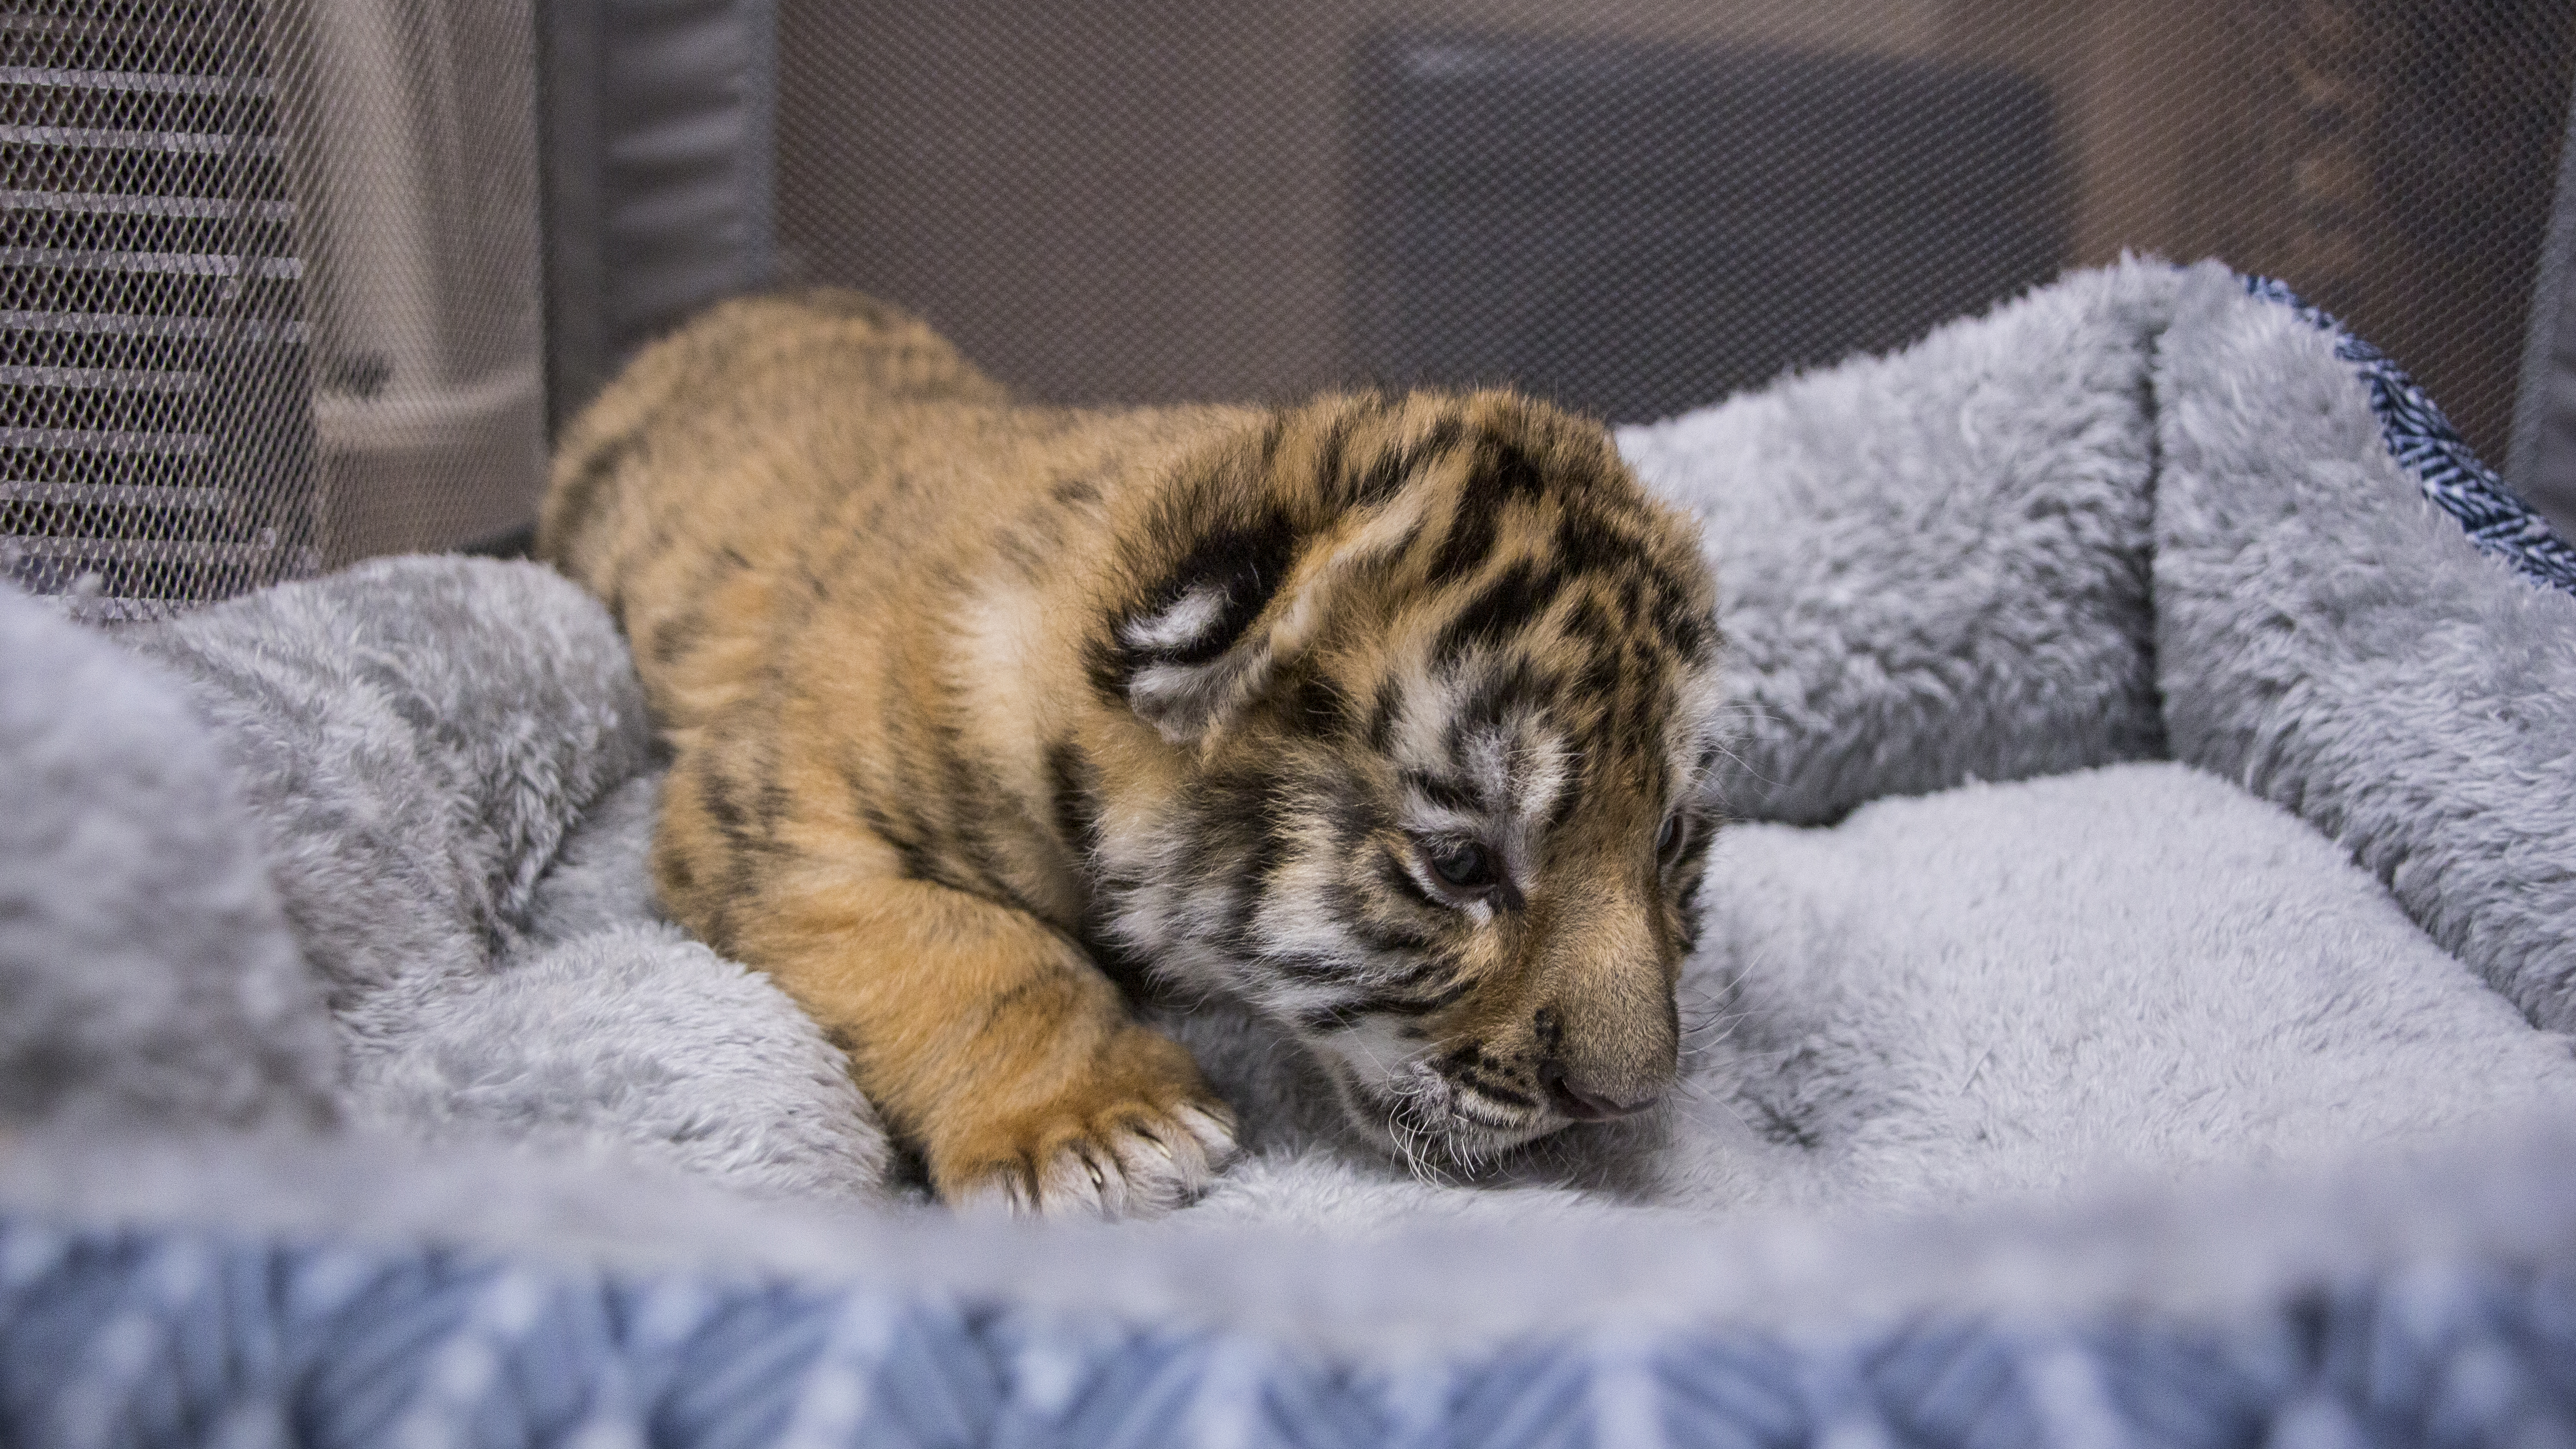 Tiger Creek Animal Sanctuary to introduce three tiger cubs to public